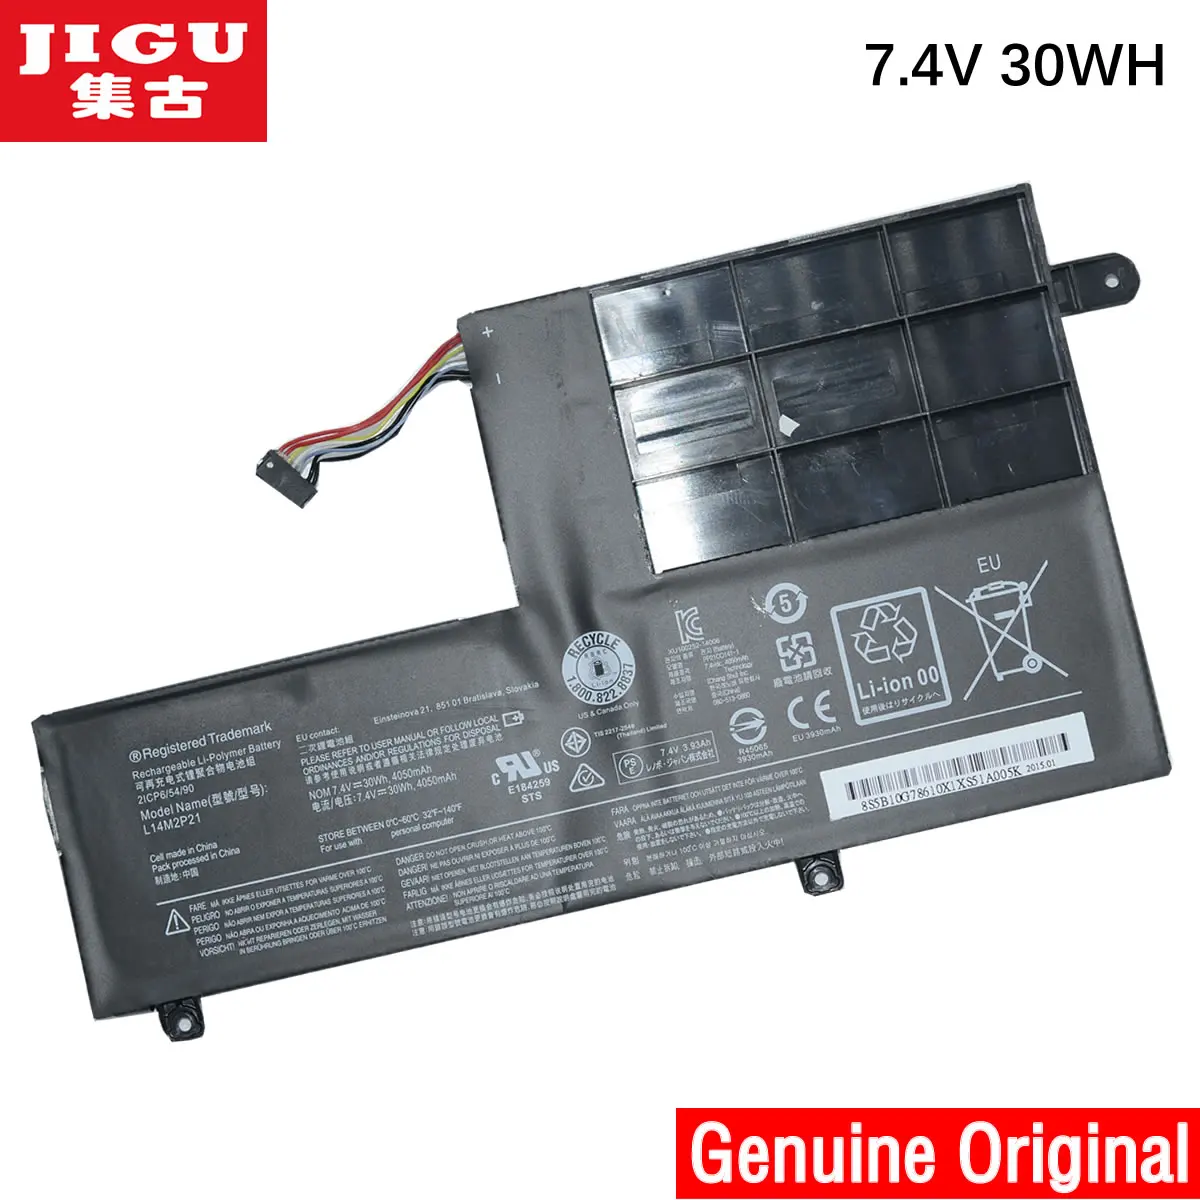 

JIGU 7.4V 4050mAh L14L2P21 L14M2P21 Battery For ldeapad 300s S41 S4175 S41-70AM-IFI S41-70-ITH S41-70-ISE Series